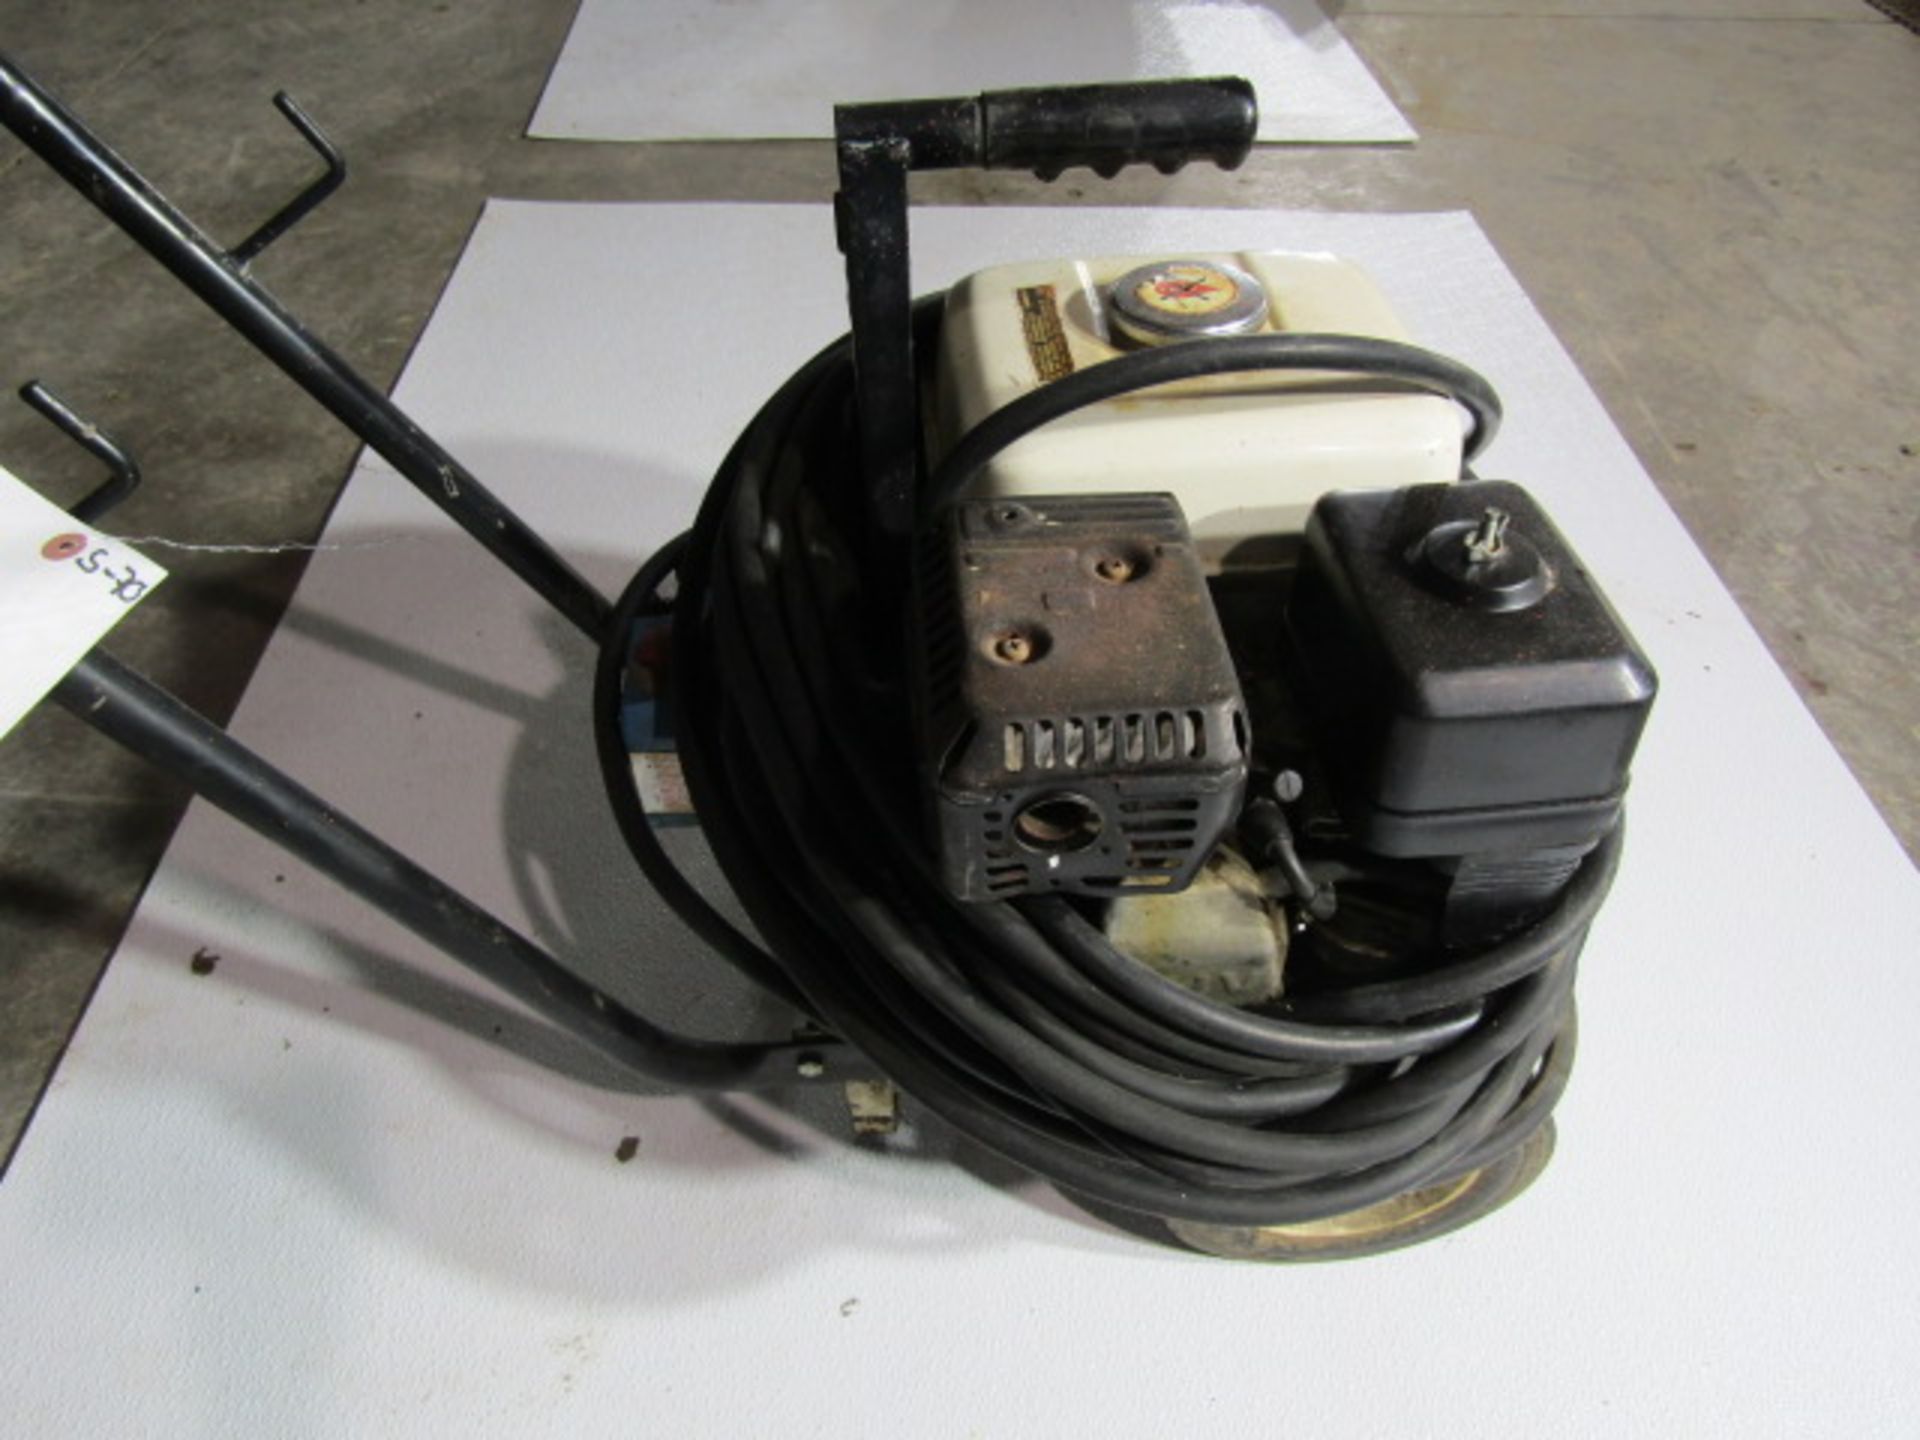 Pedal Swanson Pressure Washer with Hose, Located in Hopkinton, IA - Image 3 of 3